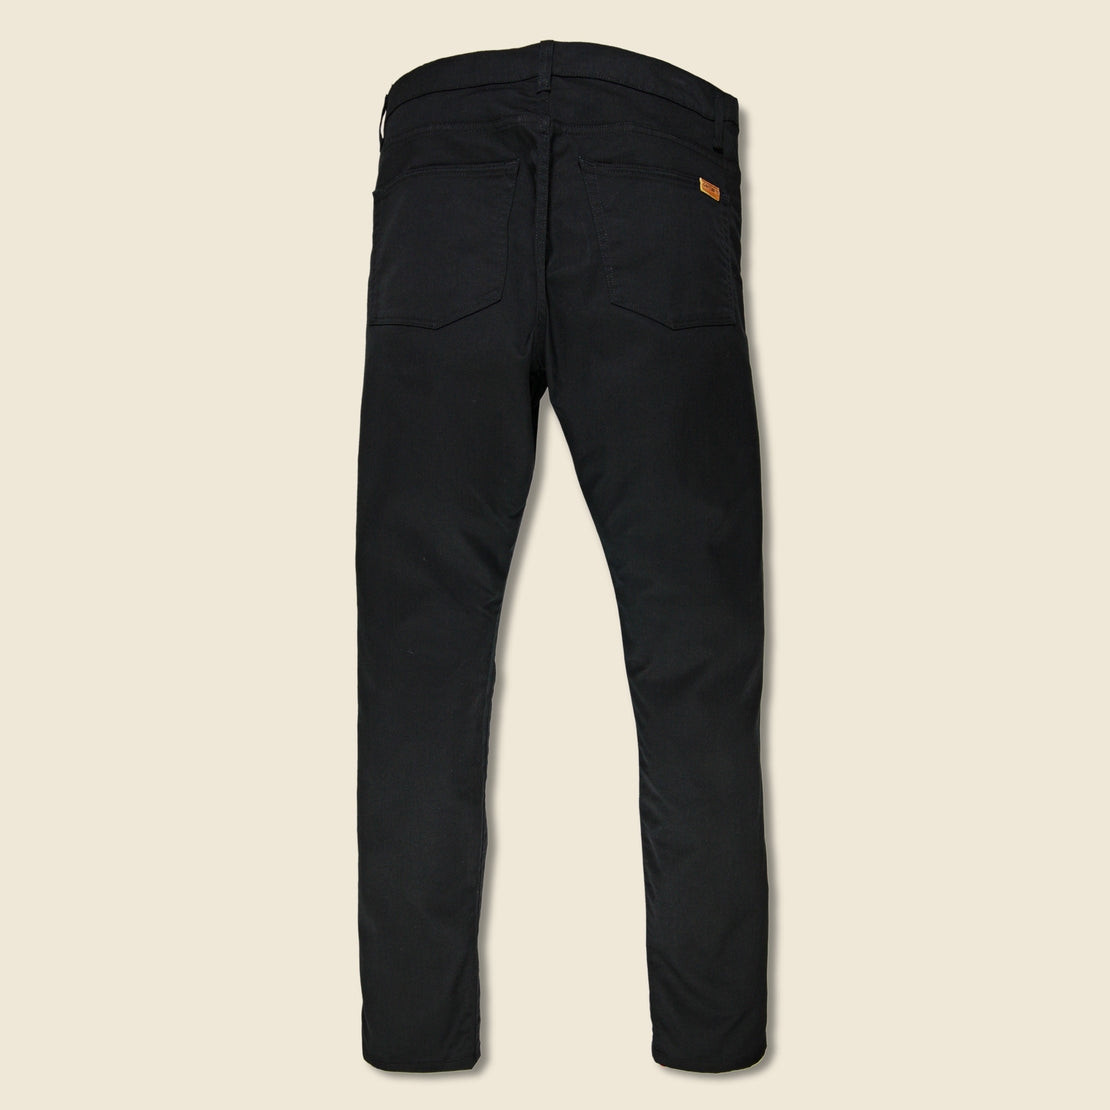 Vicious Pant - Black - Carhartt WIP - STAG Provisions - Pants - Twill